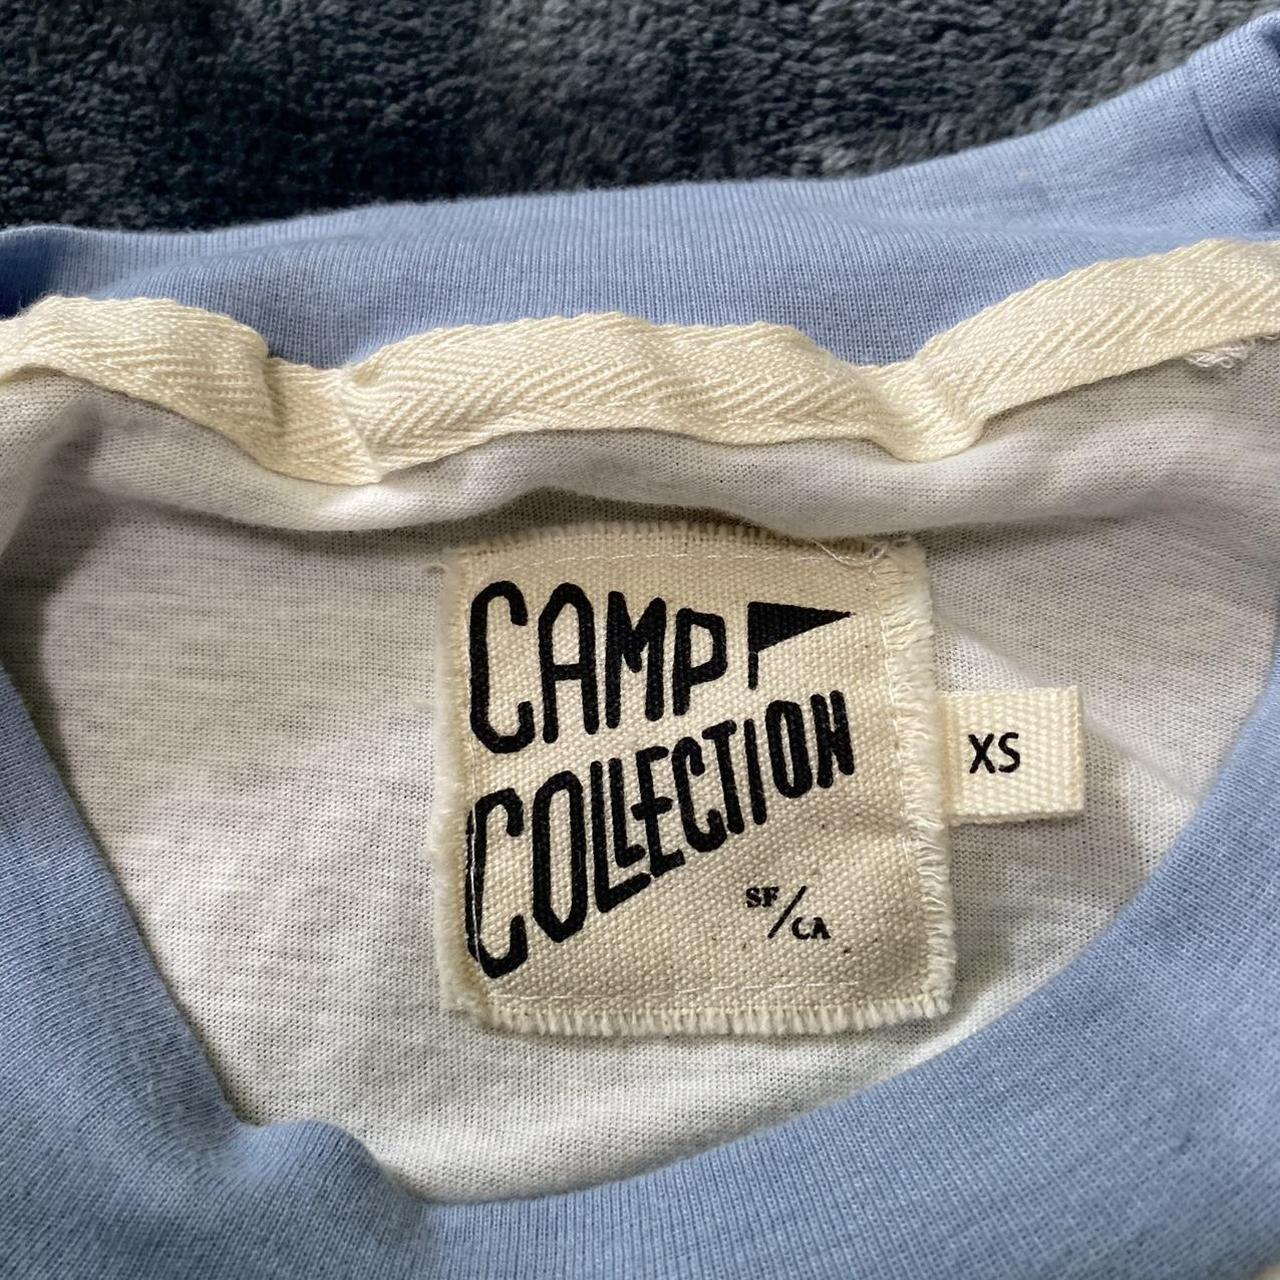 Camp Collection Women's White and Blue T-shirt (3)